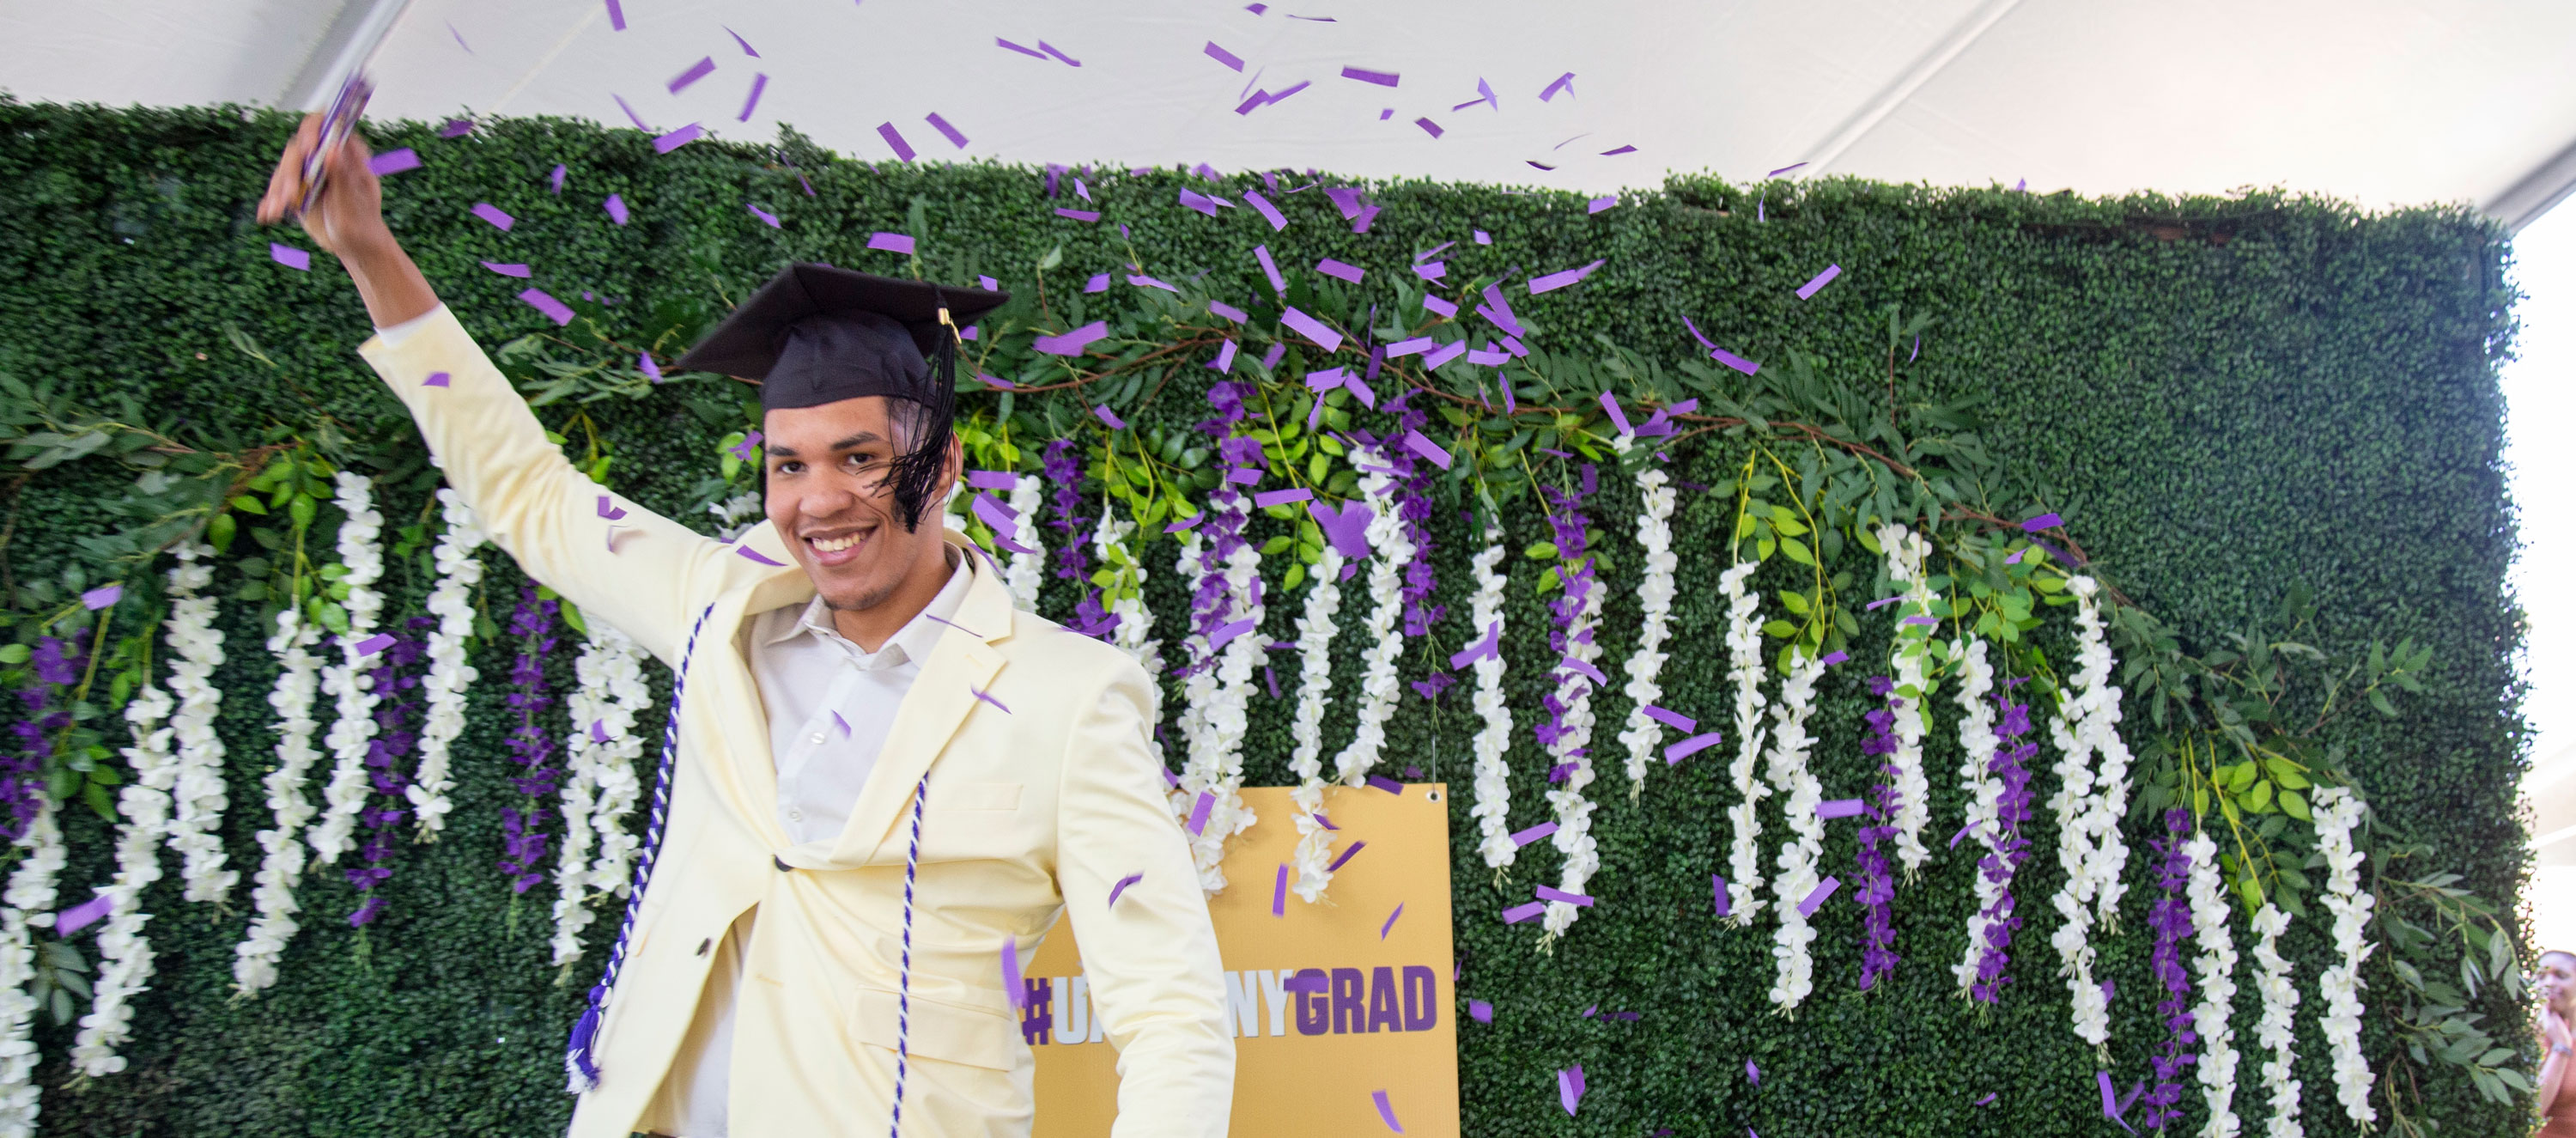 A student in a cream suit and black graduation cap raises one hand and smiles while posing for a photo under purple and white confetti.